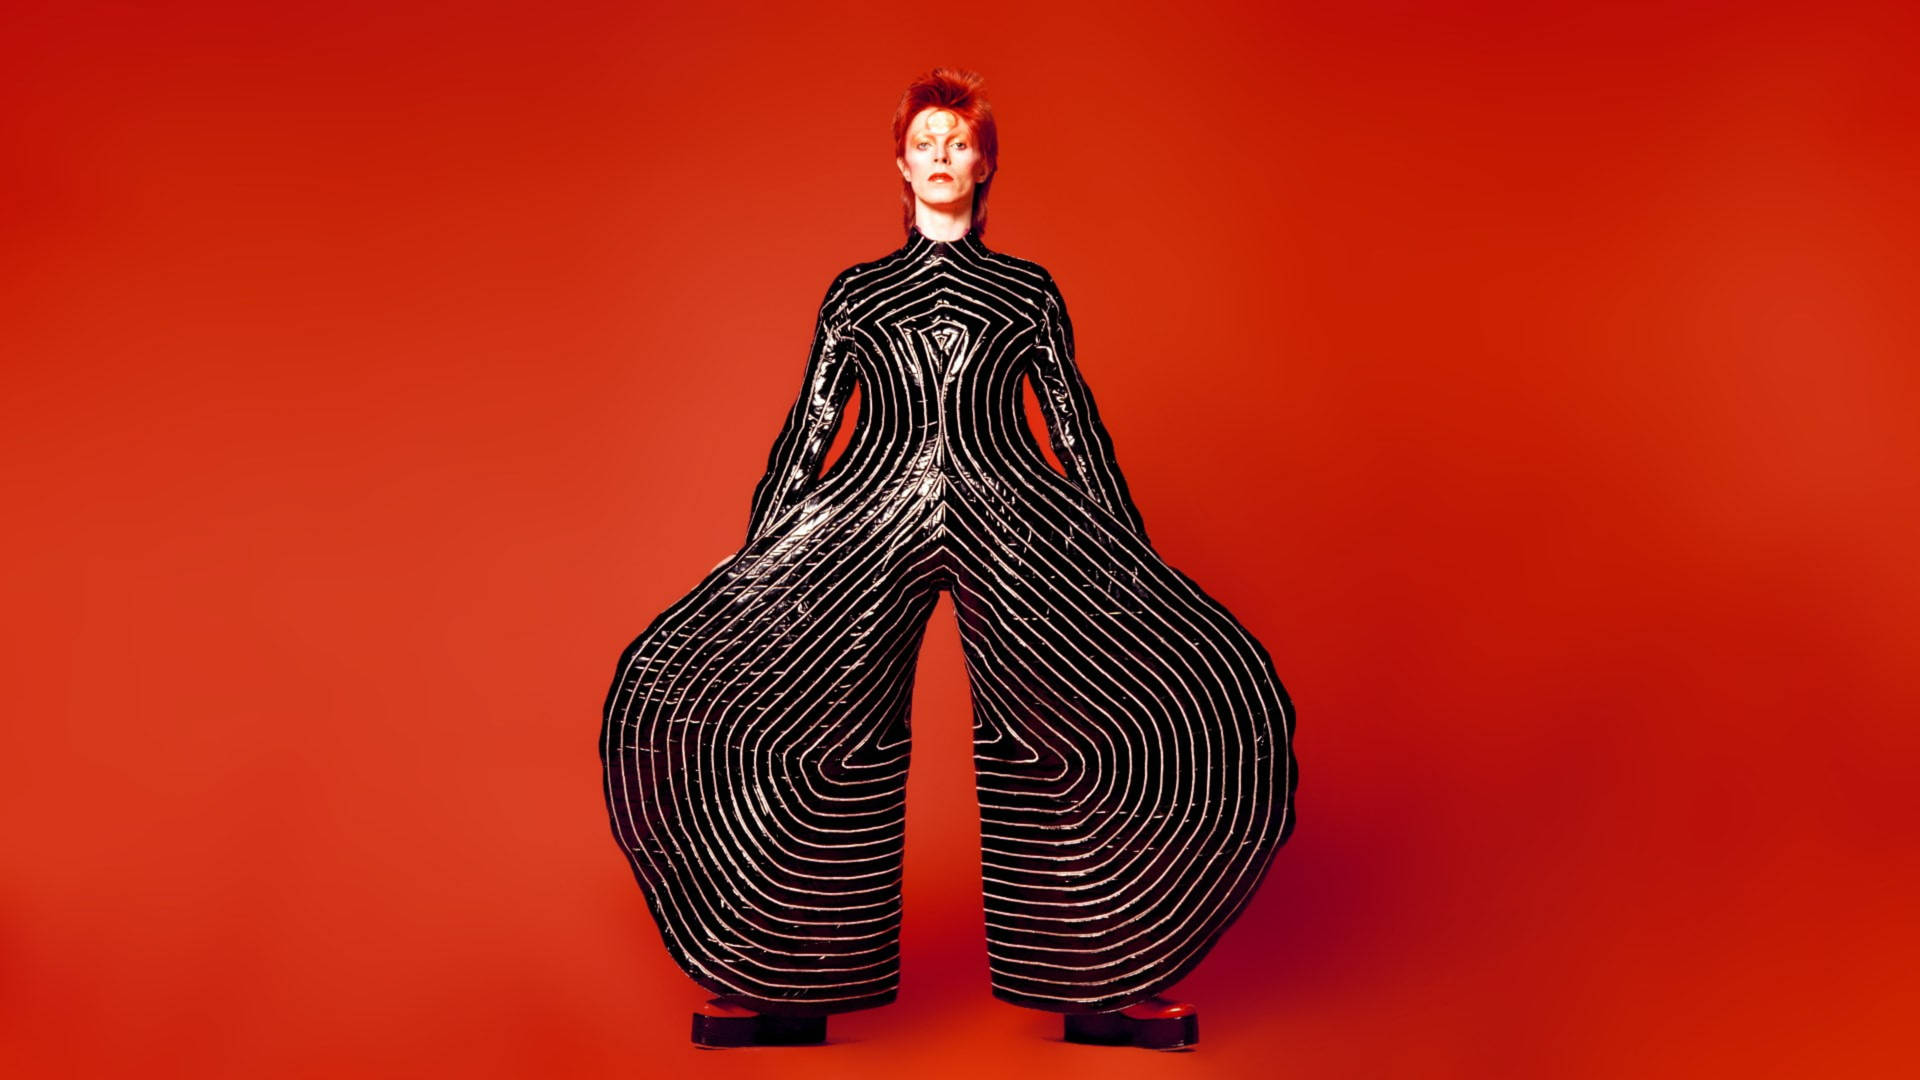 David Bowie Stripes In Red